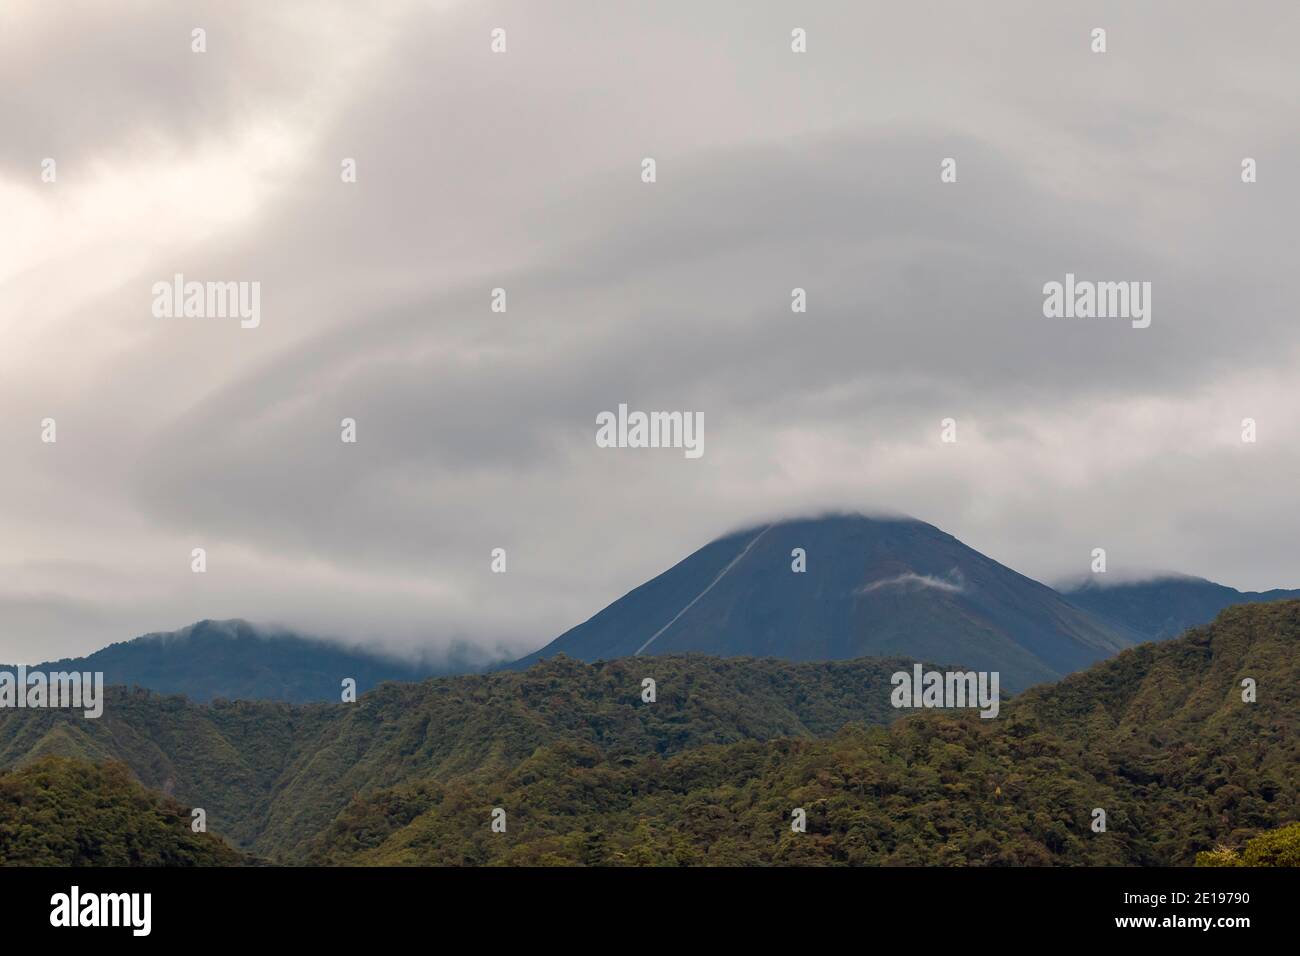 Lenticular cloud over Reventador Volcano , November 2015. Situated in a remote region of the Ecuadorian Amazon.It has been erupting since 2002. Stock Photo